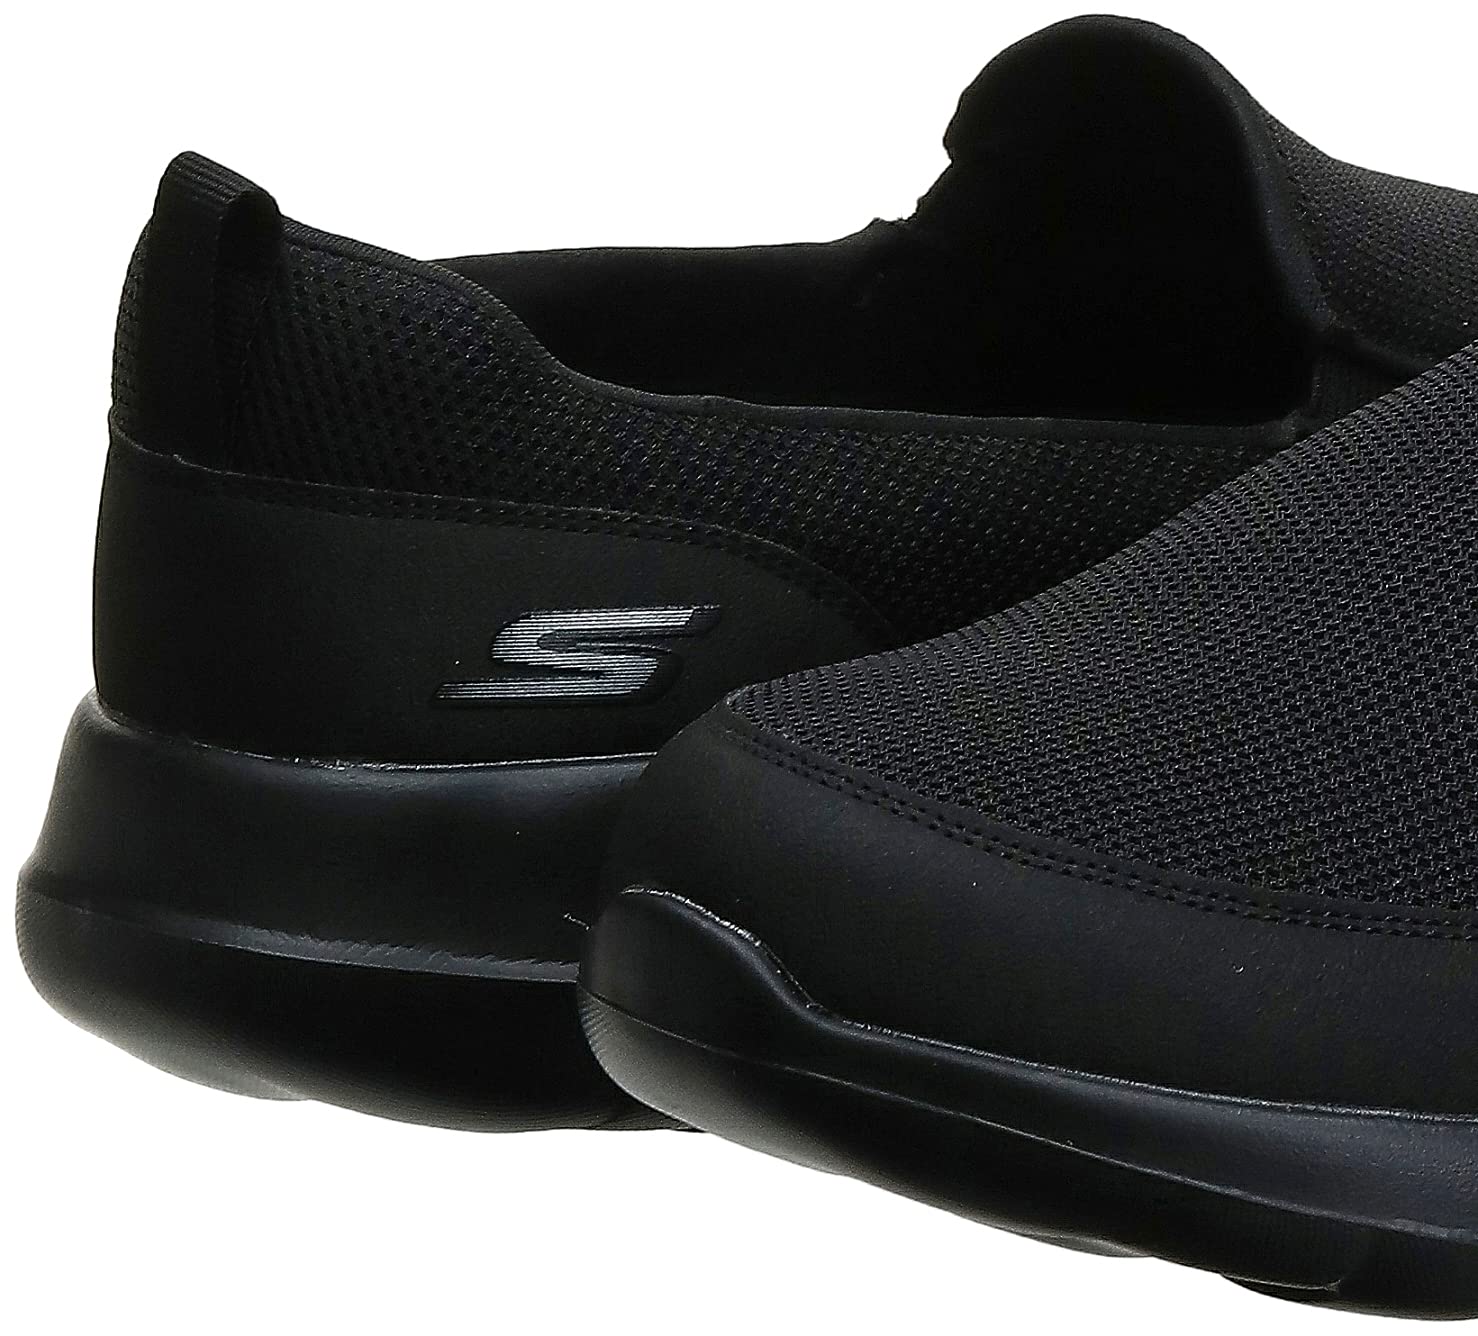 Skechers Men's Go Max Clinched-Athletic Mesh Double Gore Slip on Walking Shoe